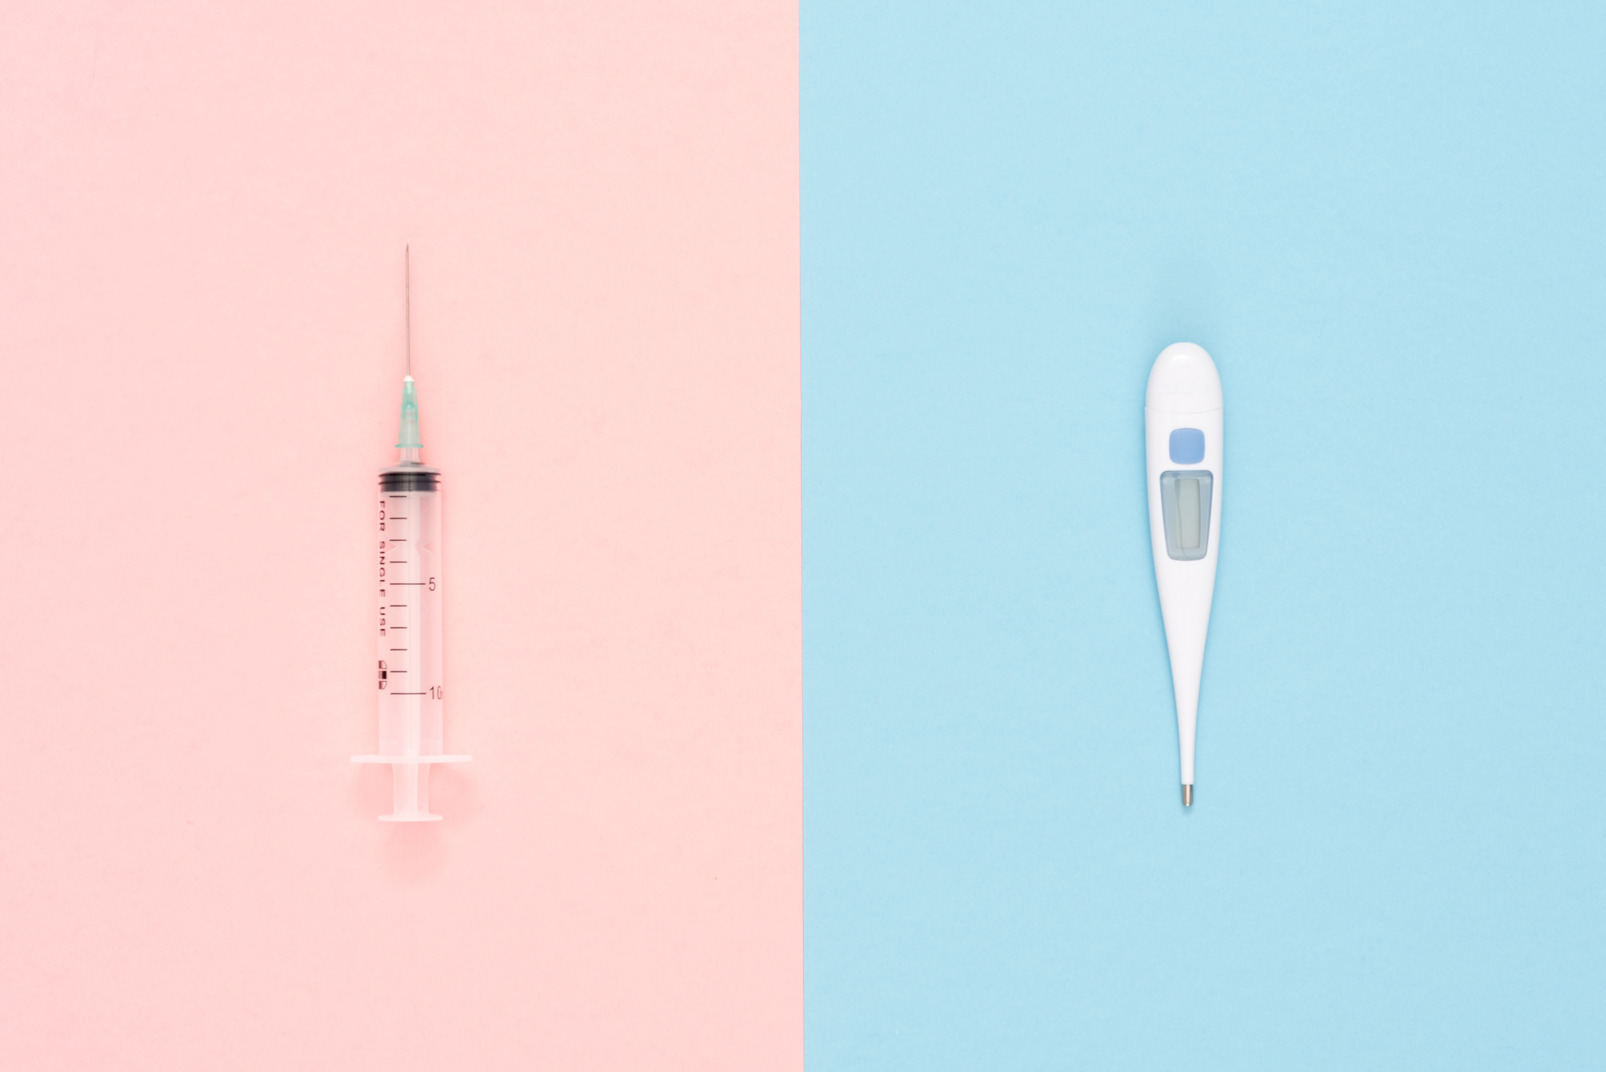 Medical disposable syringe and digital thermometer